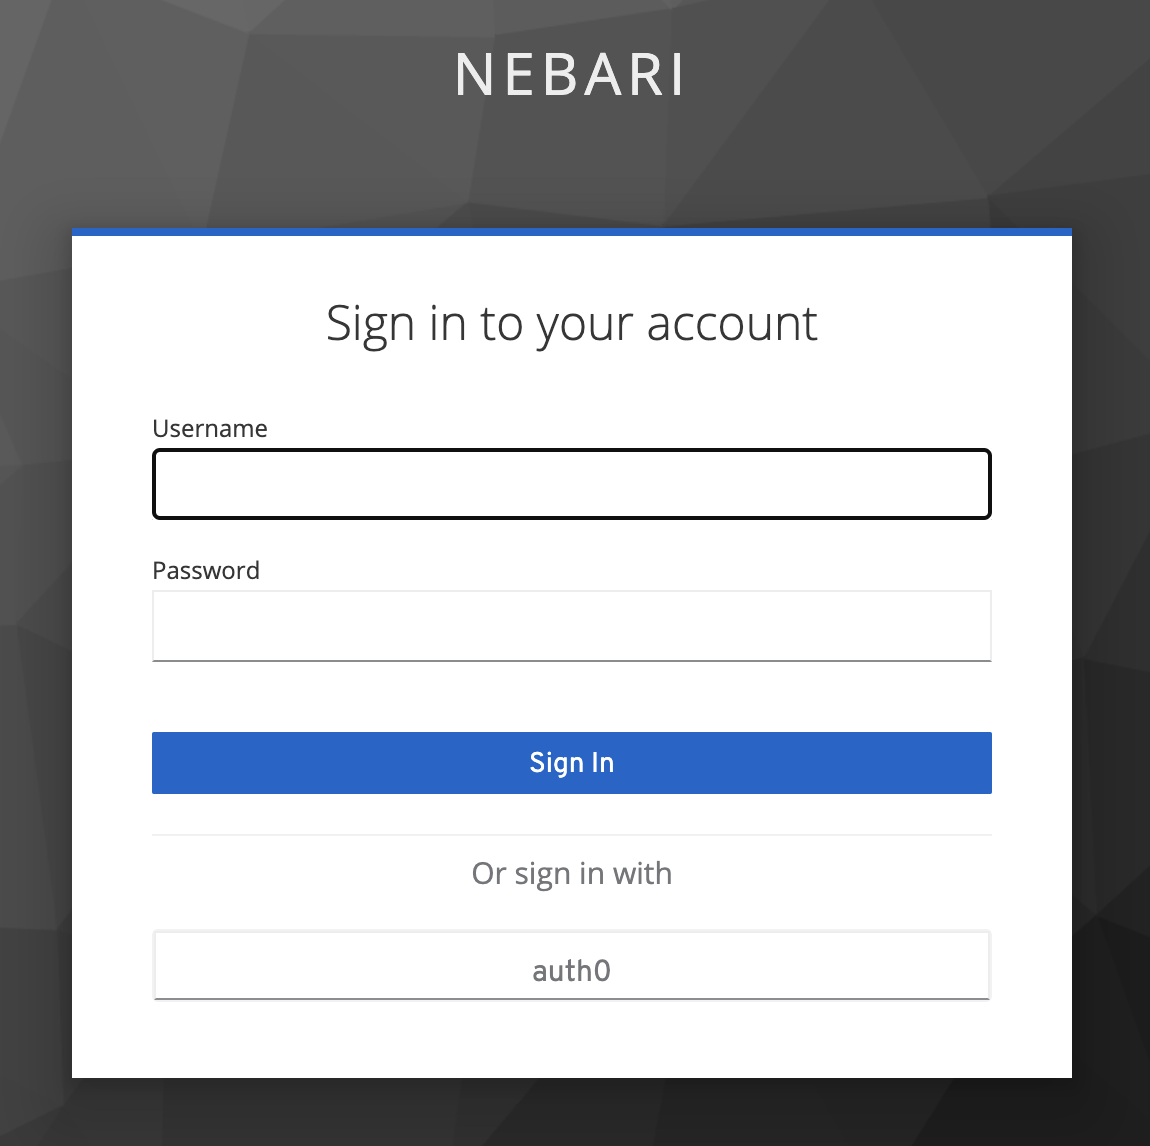 Nebari Keycloak auth screen - shows a form to provide username or password or to authenticate through Auth0